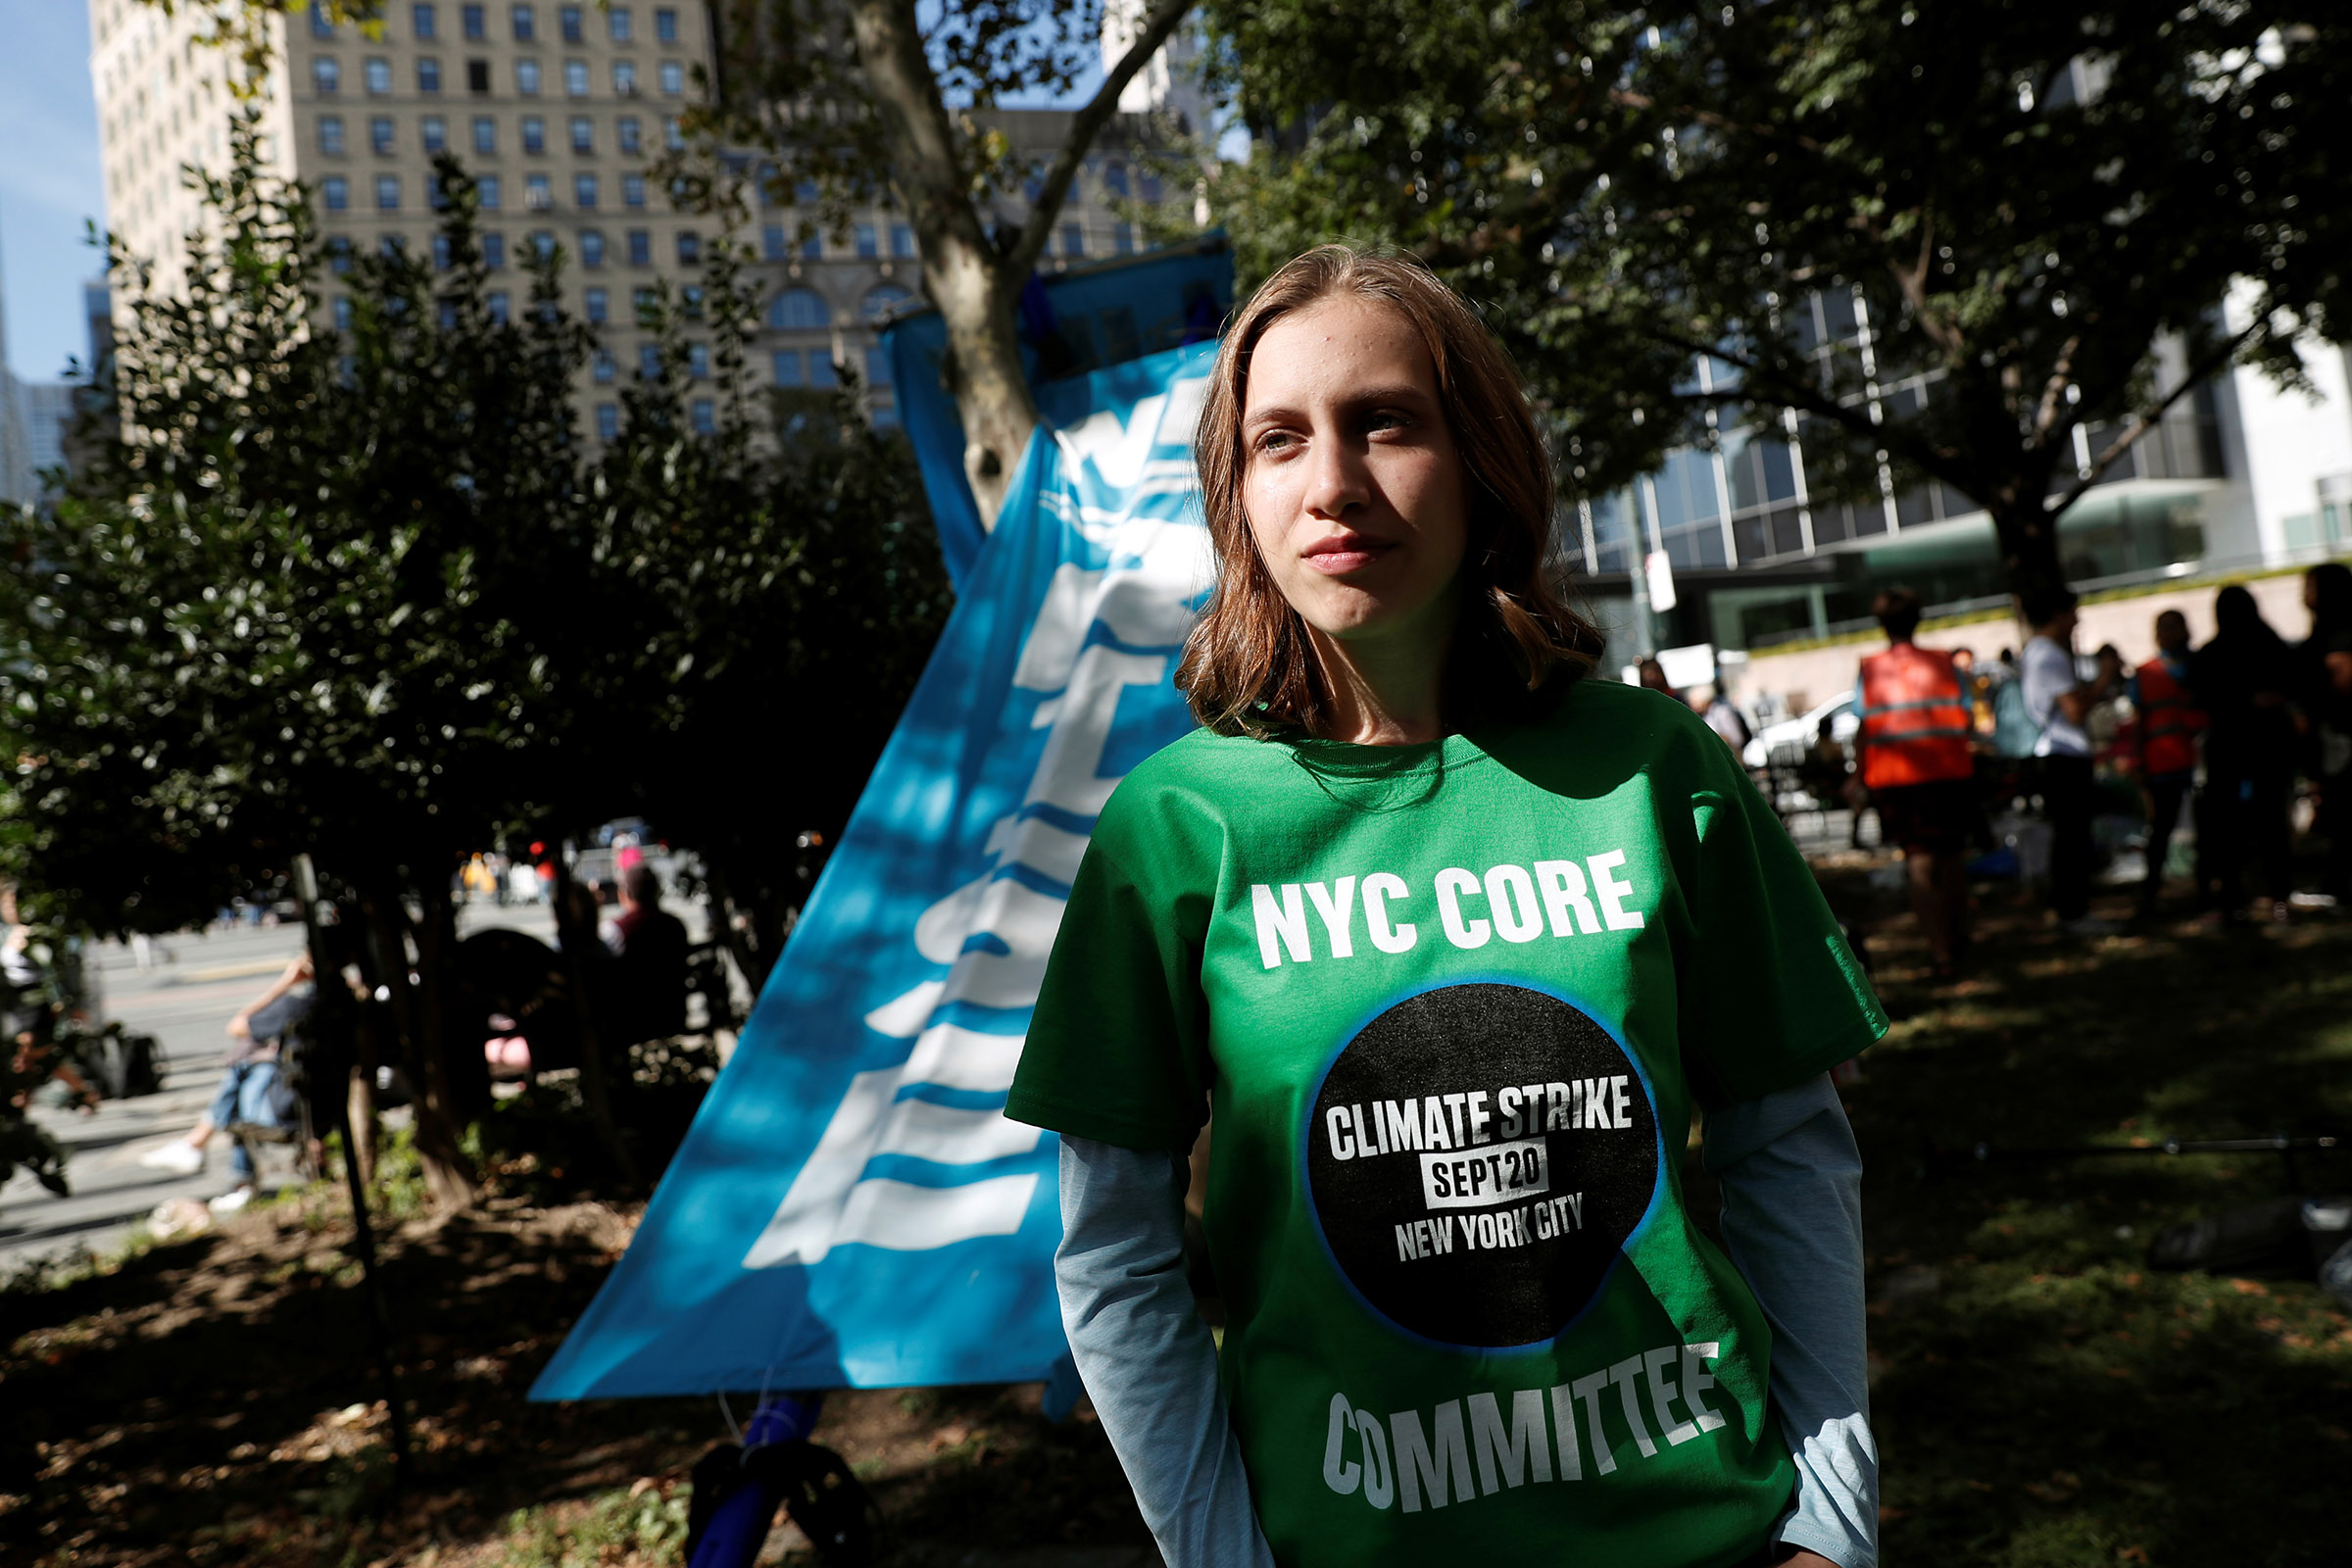 14-year-old activist Alexandria Villasenor takes part in a demonstration as part of the Global Climate Strike in Manhattan in New York